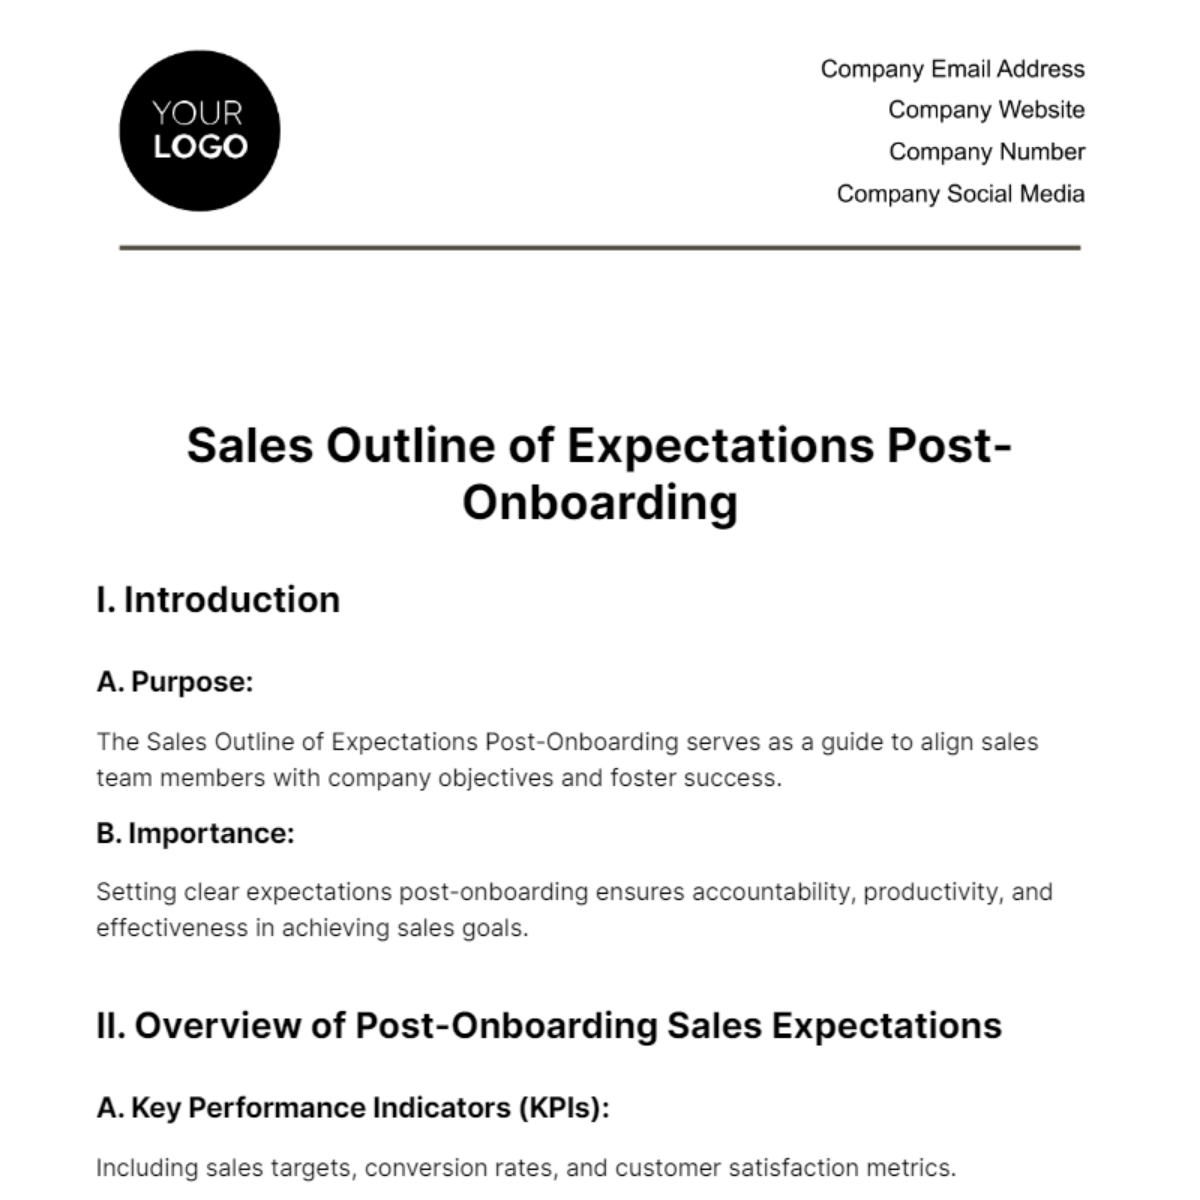 Sales Outline of Expectations Post-Onboarding Template